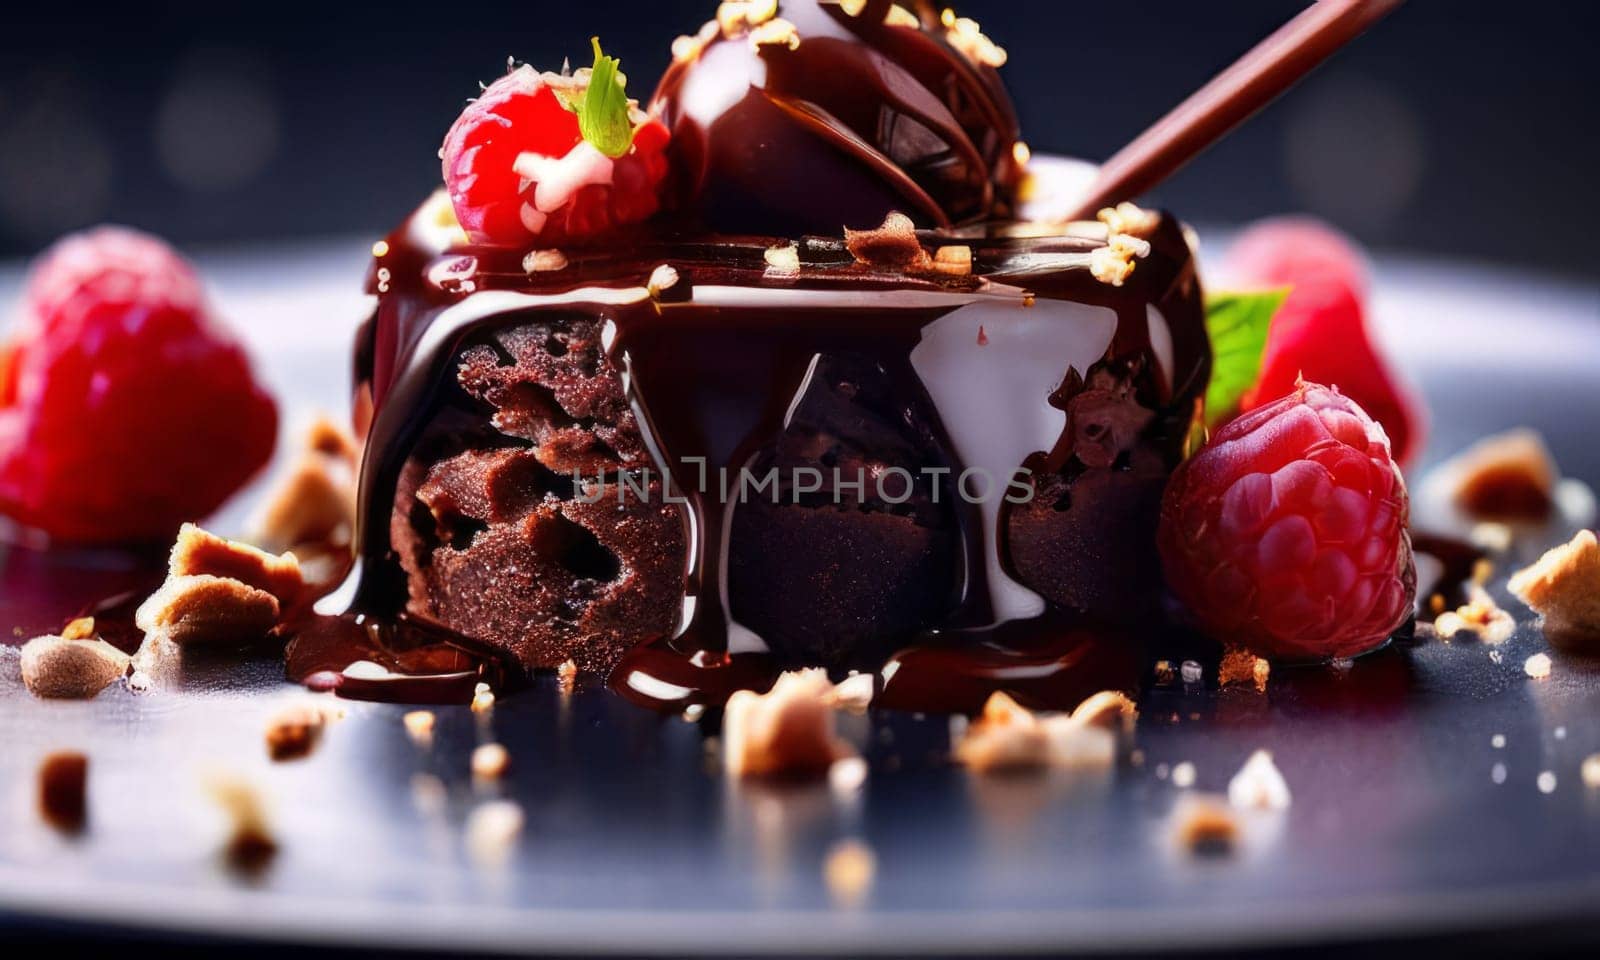 Decadent chocolate cake adorned with fresh raspberries, drizzled with rich chocolate sauce, perfect combination of sweet, tart flavors. For advertise cafe, patisserie, restaurant, food blog, cookbook